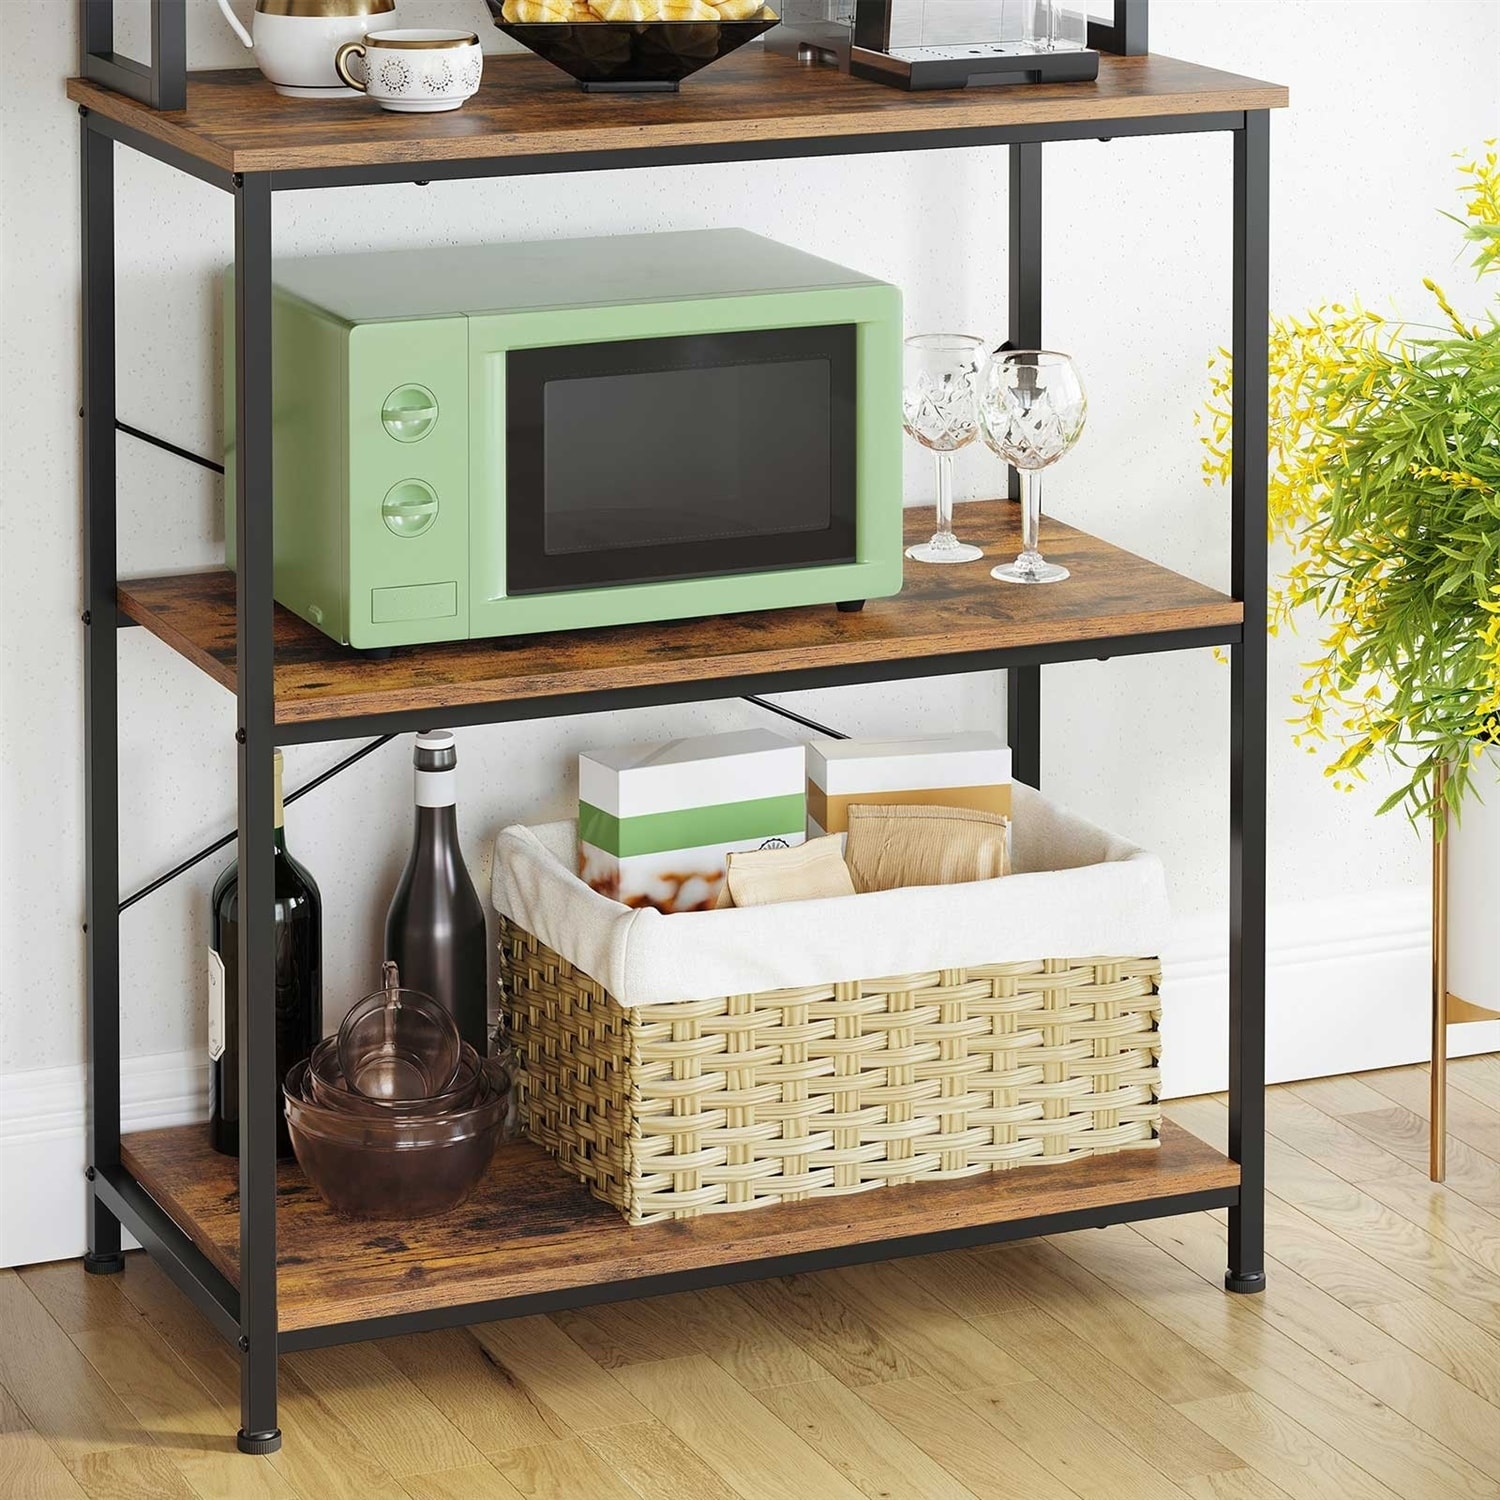 https://ak1.ostkcdn.com/images/products/is/images/direct/4d6d5a25b39ea2f87d7ad3df0d9b008cf5bb316a/Farmhouse-6-Tier-Industrial-Utility-Kitchen-Bakers-Rack-Microwave-Stand.jpg